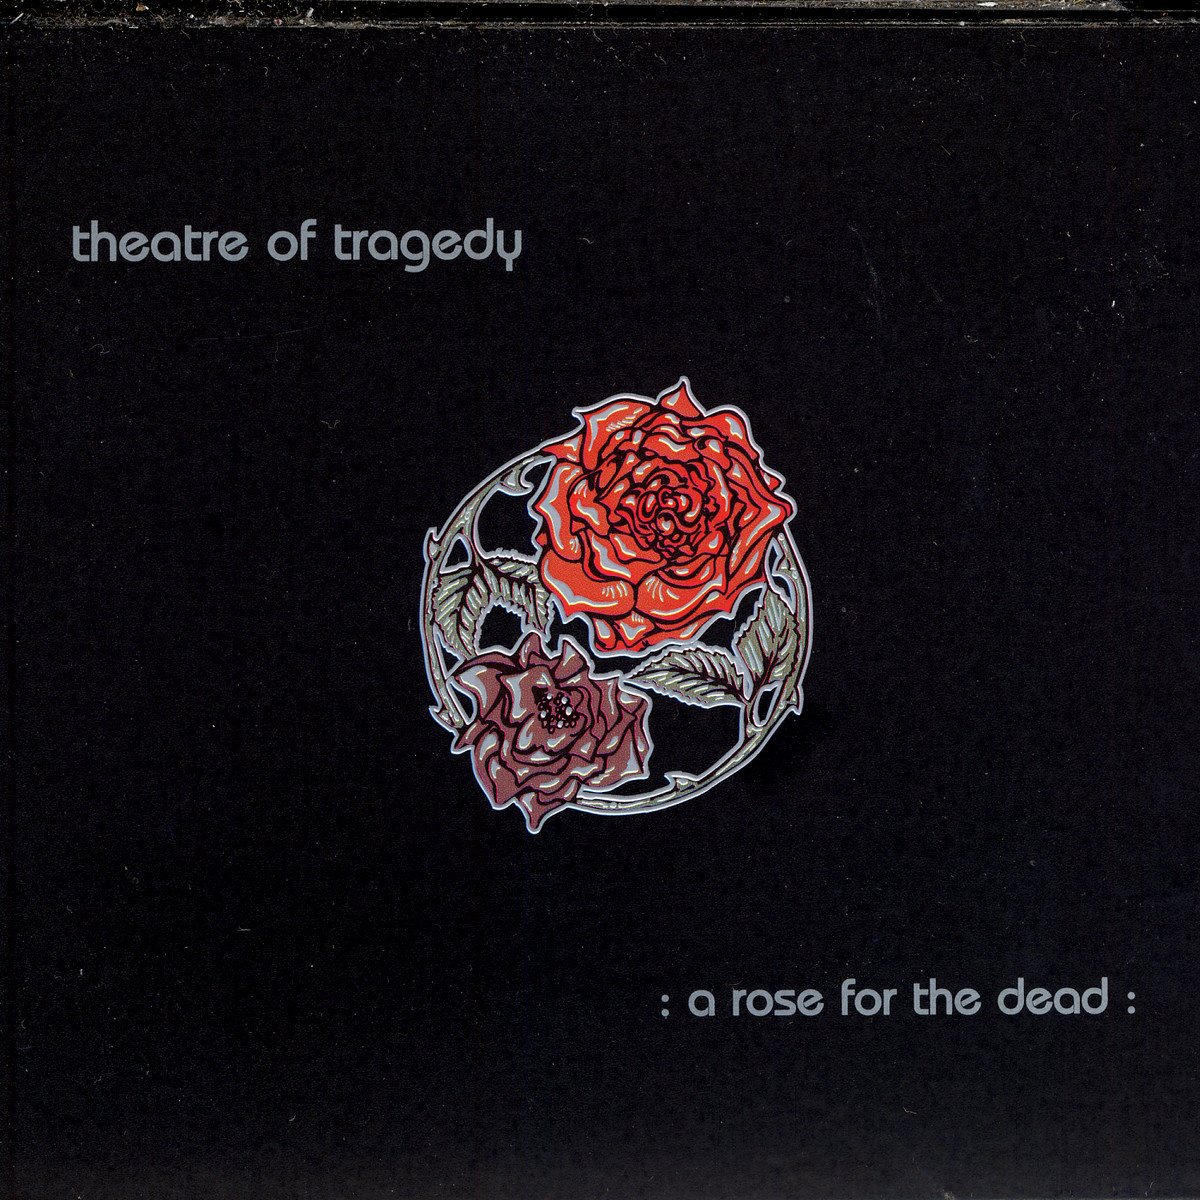 A Rose for the Dead – Theatre of Tragedy 选自《A Rose for the Dead》专辑